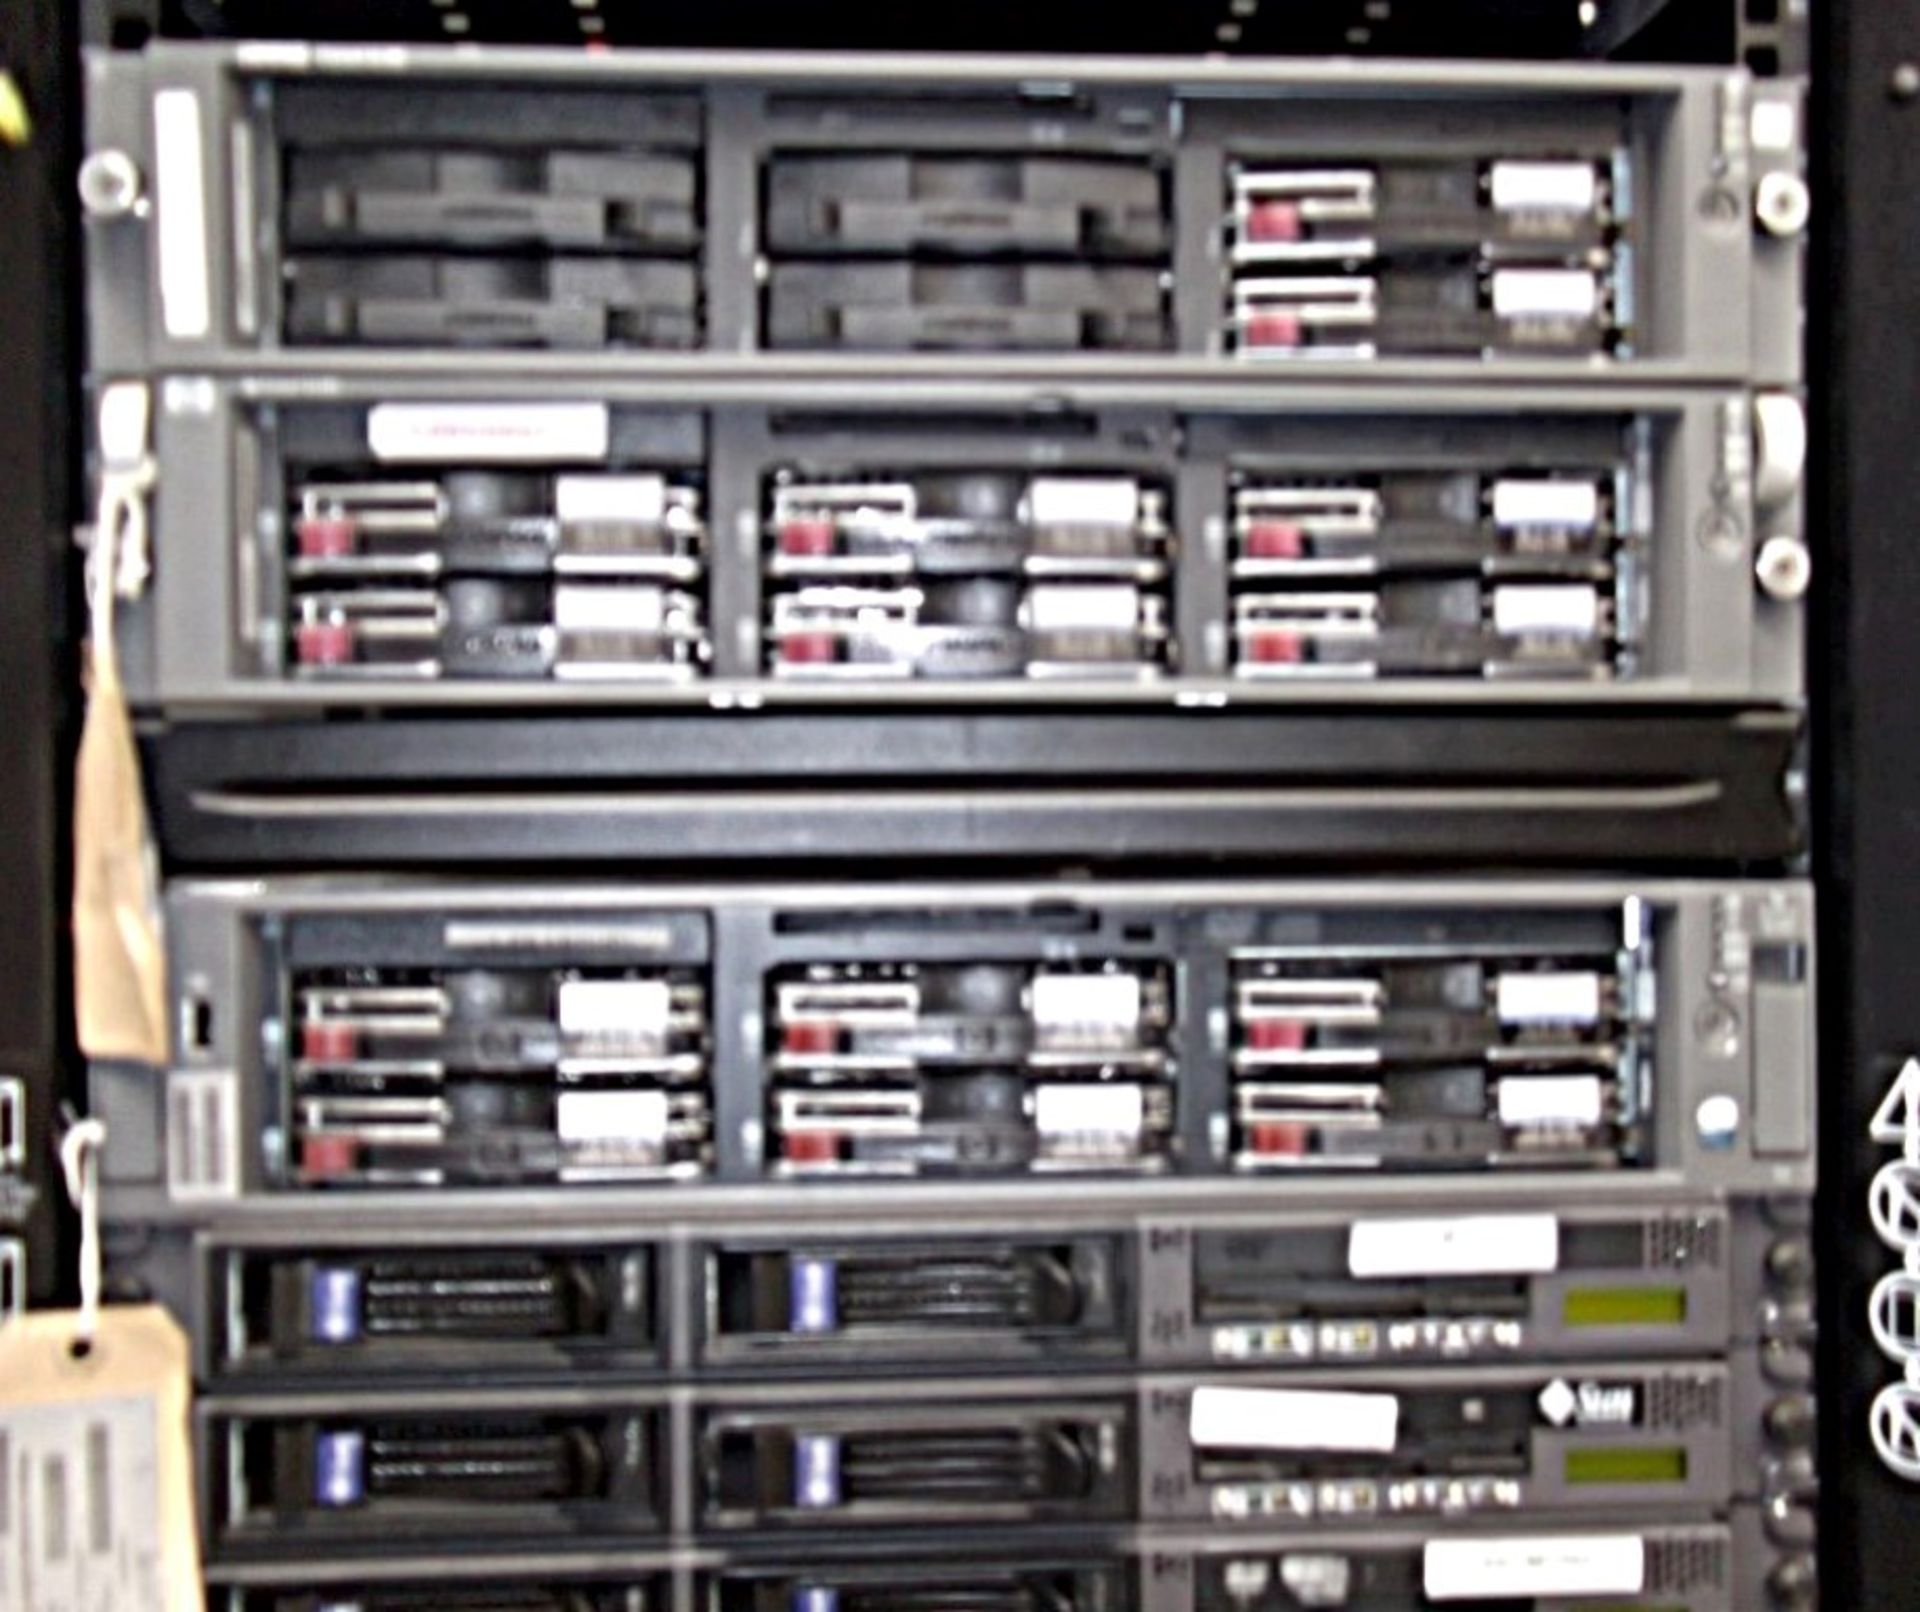 1 x APC Netshelter Server Rack With 12 x Assorted Sun Fire & HP Proliant Filer Systems Including - Image 2 of 9